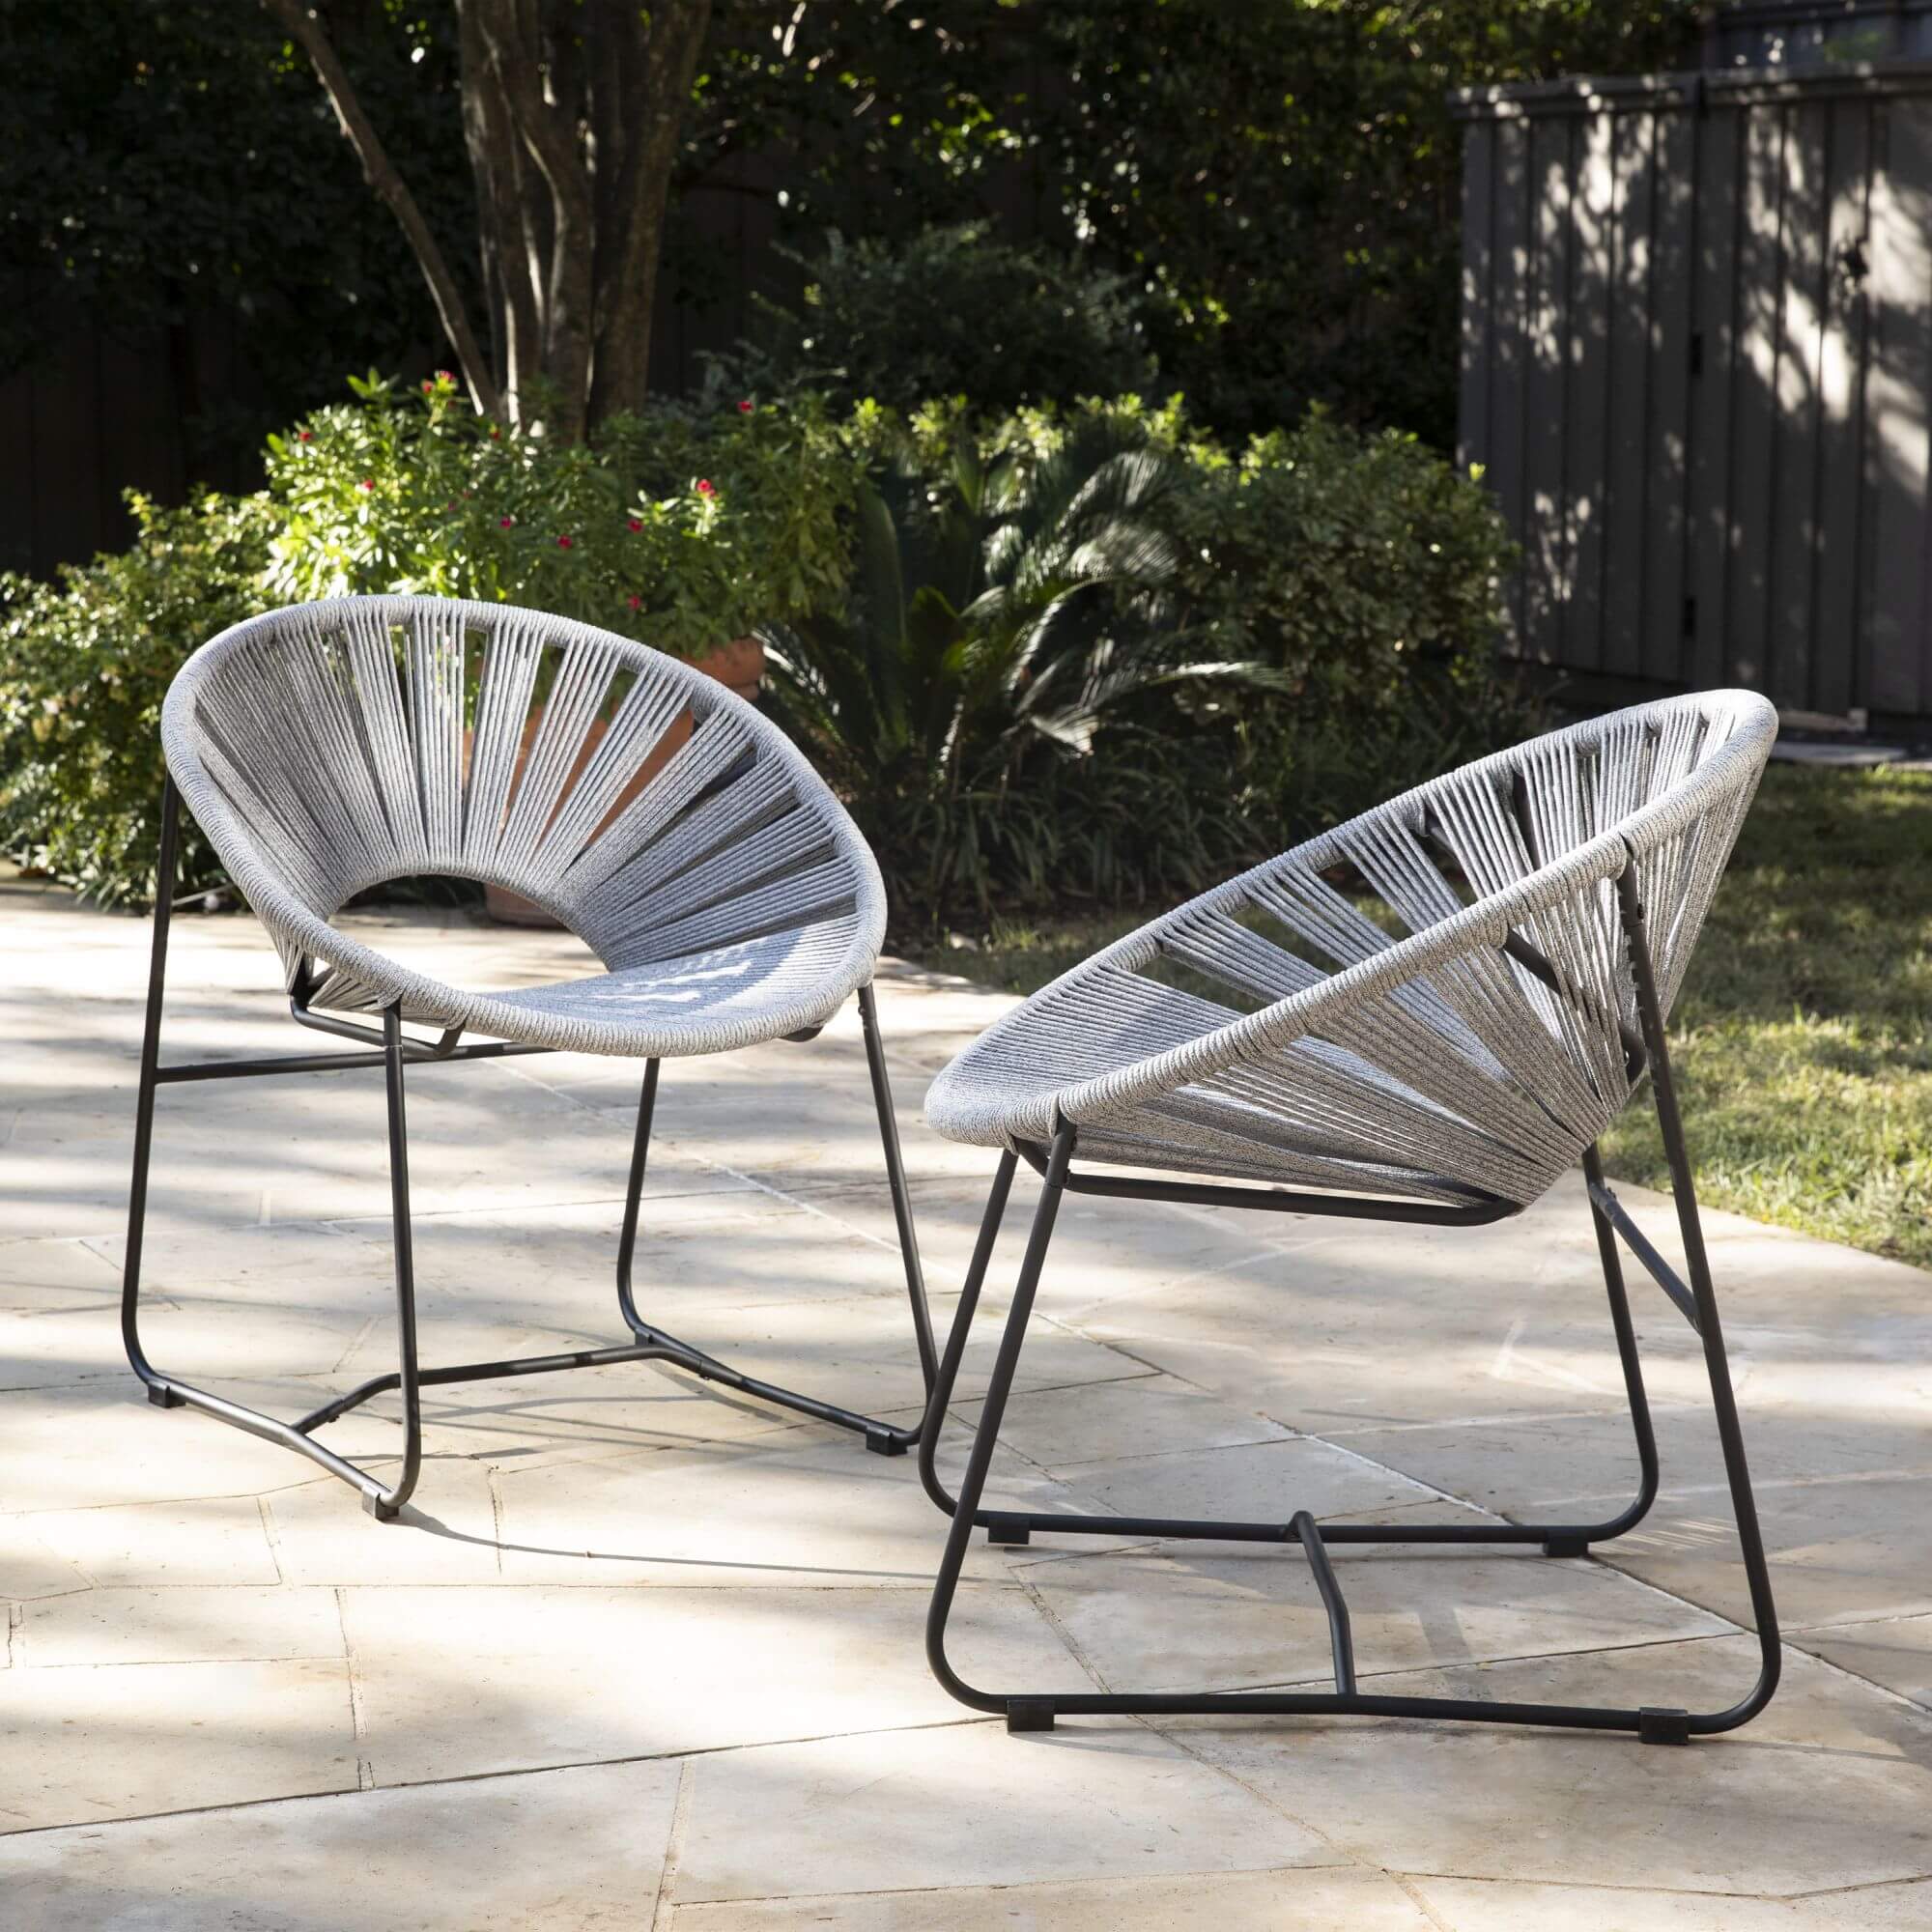 Rondly Outdoor Rope Chairs – 2pc Set